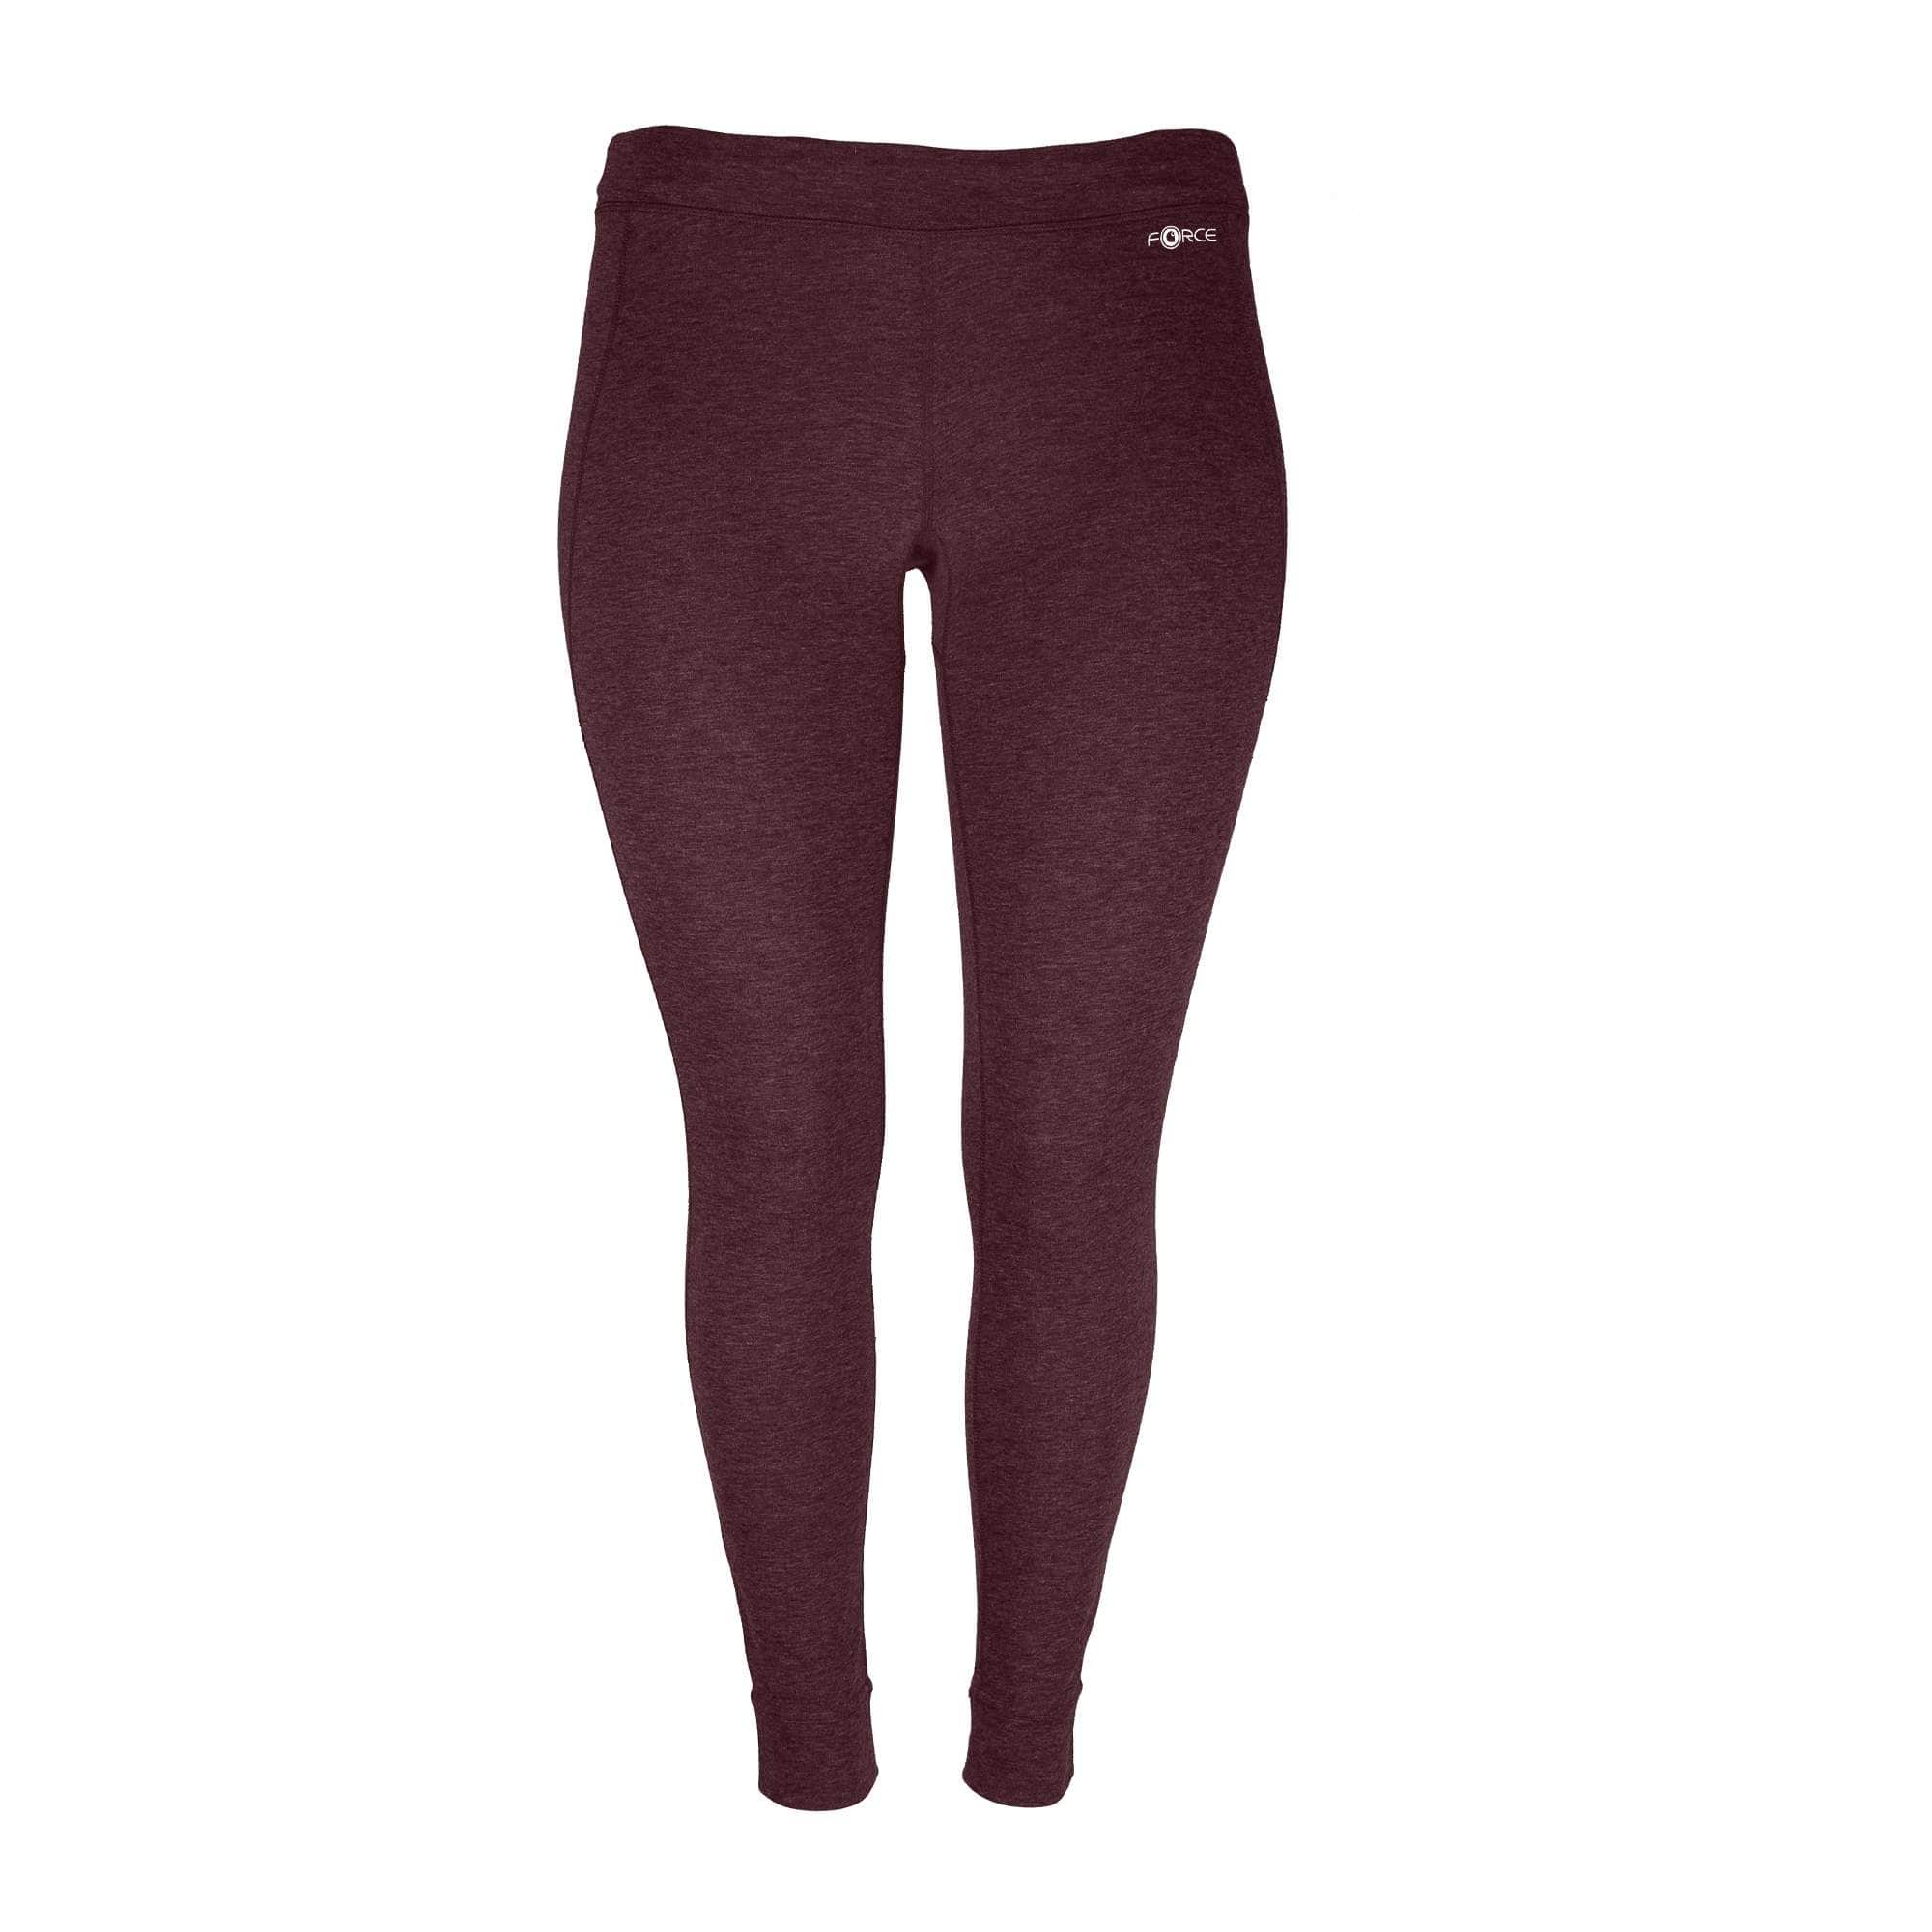 Women's Base Layer Thermal Leggings - Carhartt Force® - Heavyweight, Winter Layering Clothing Essentials